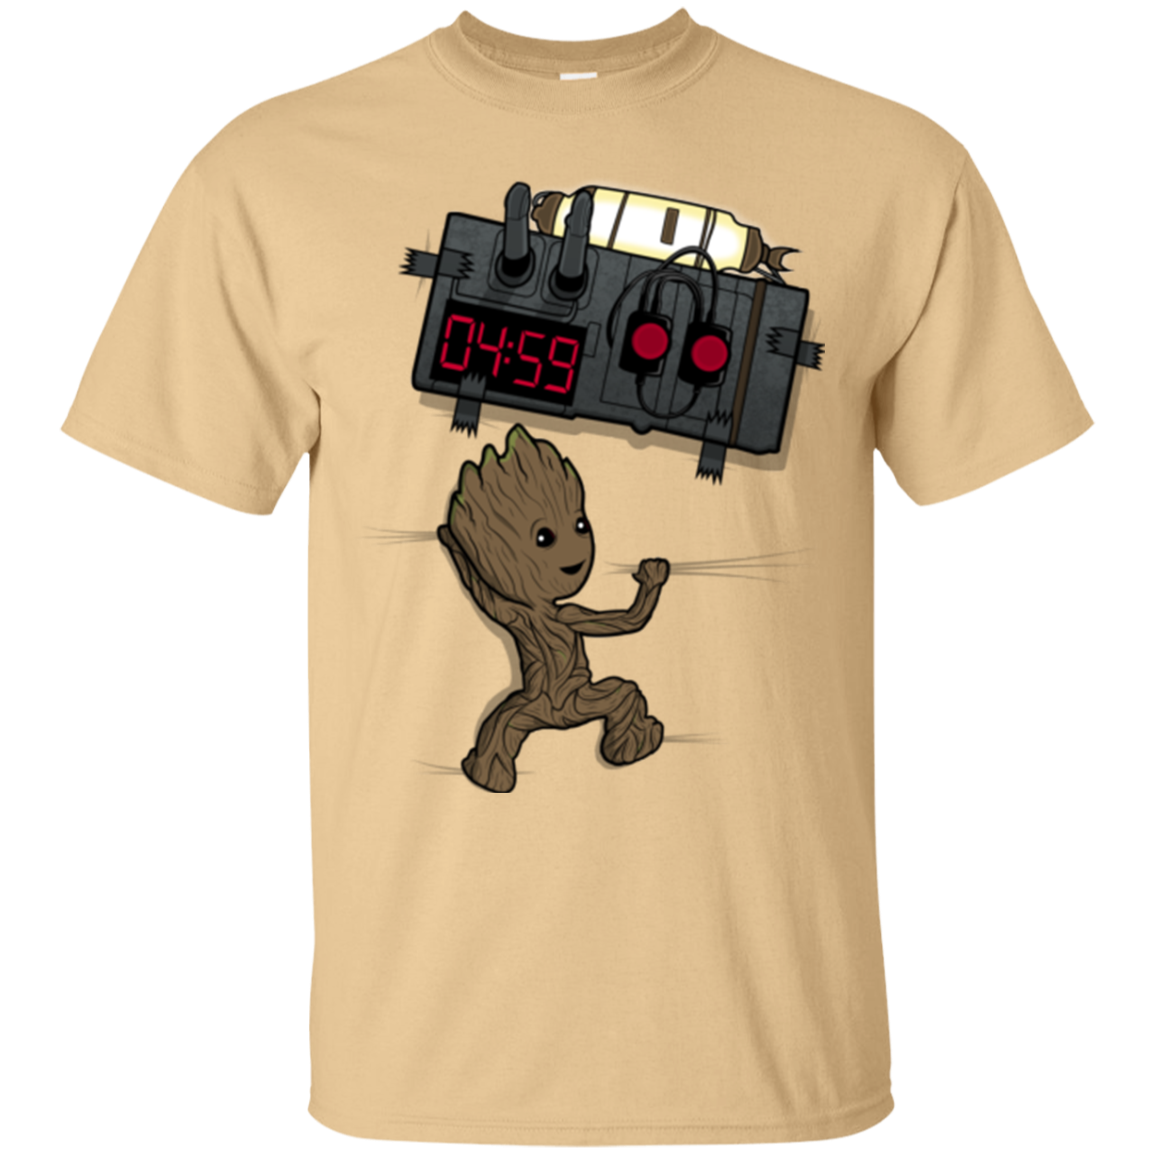 Bomb In Your Chest! T-Shirt